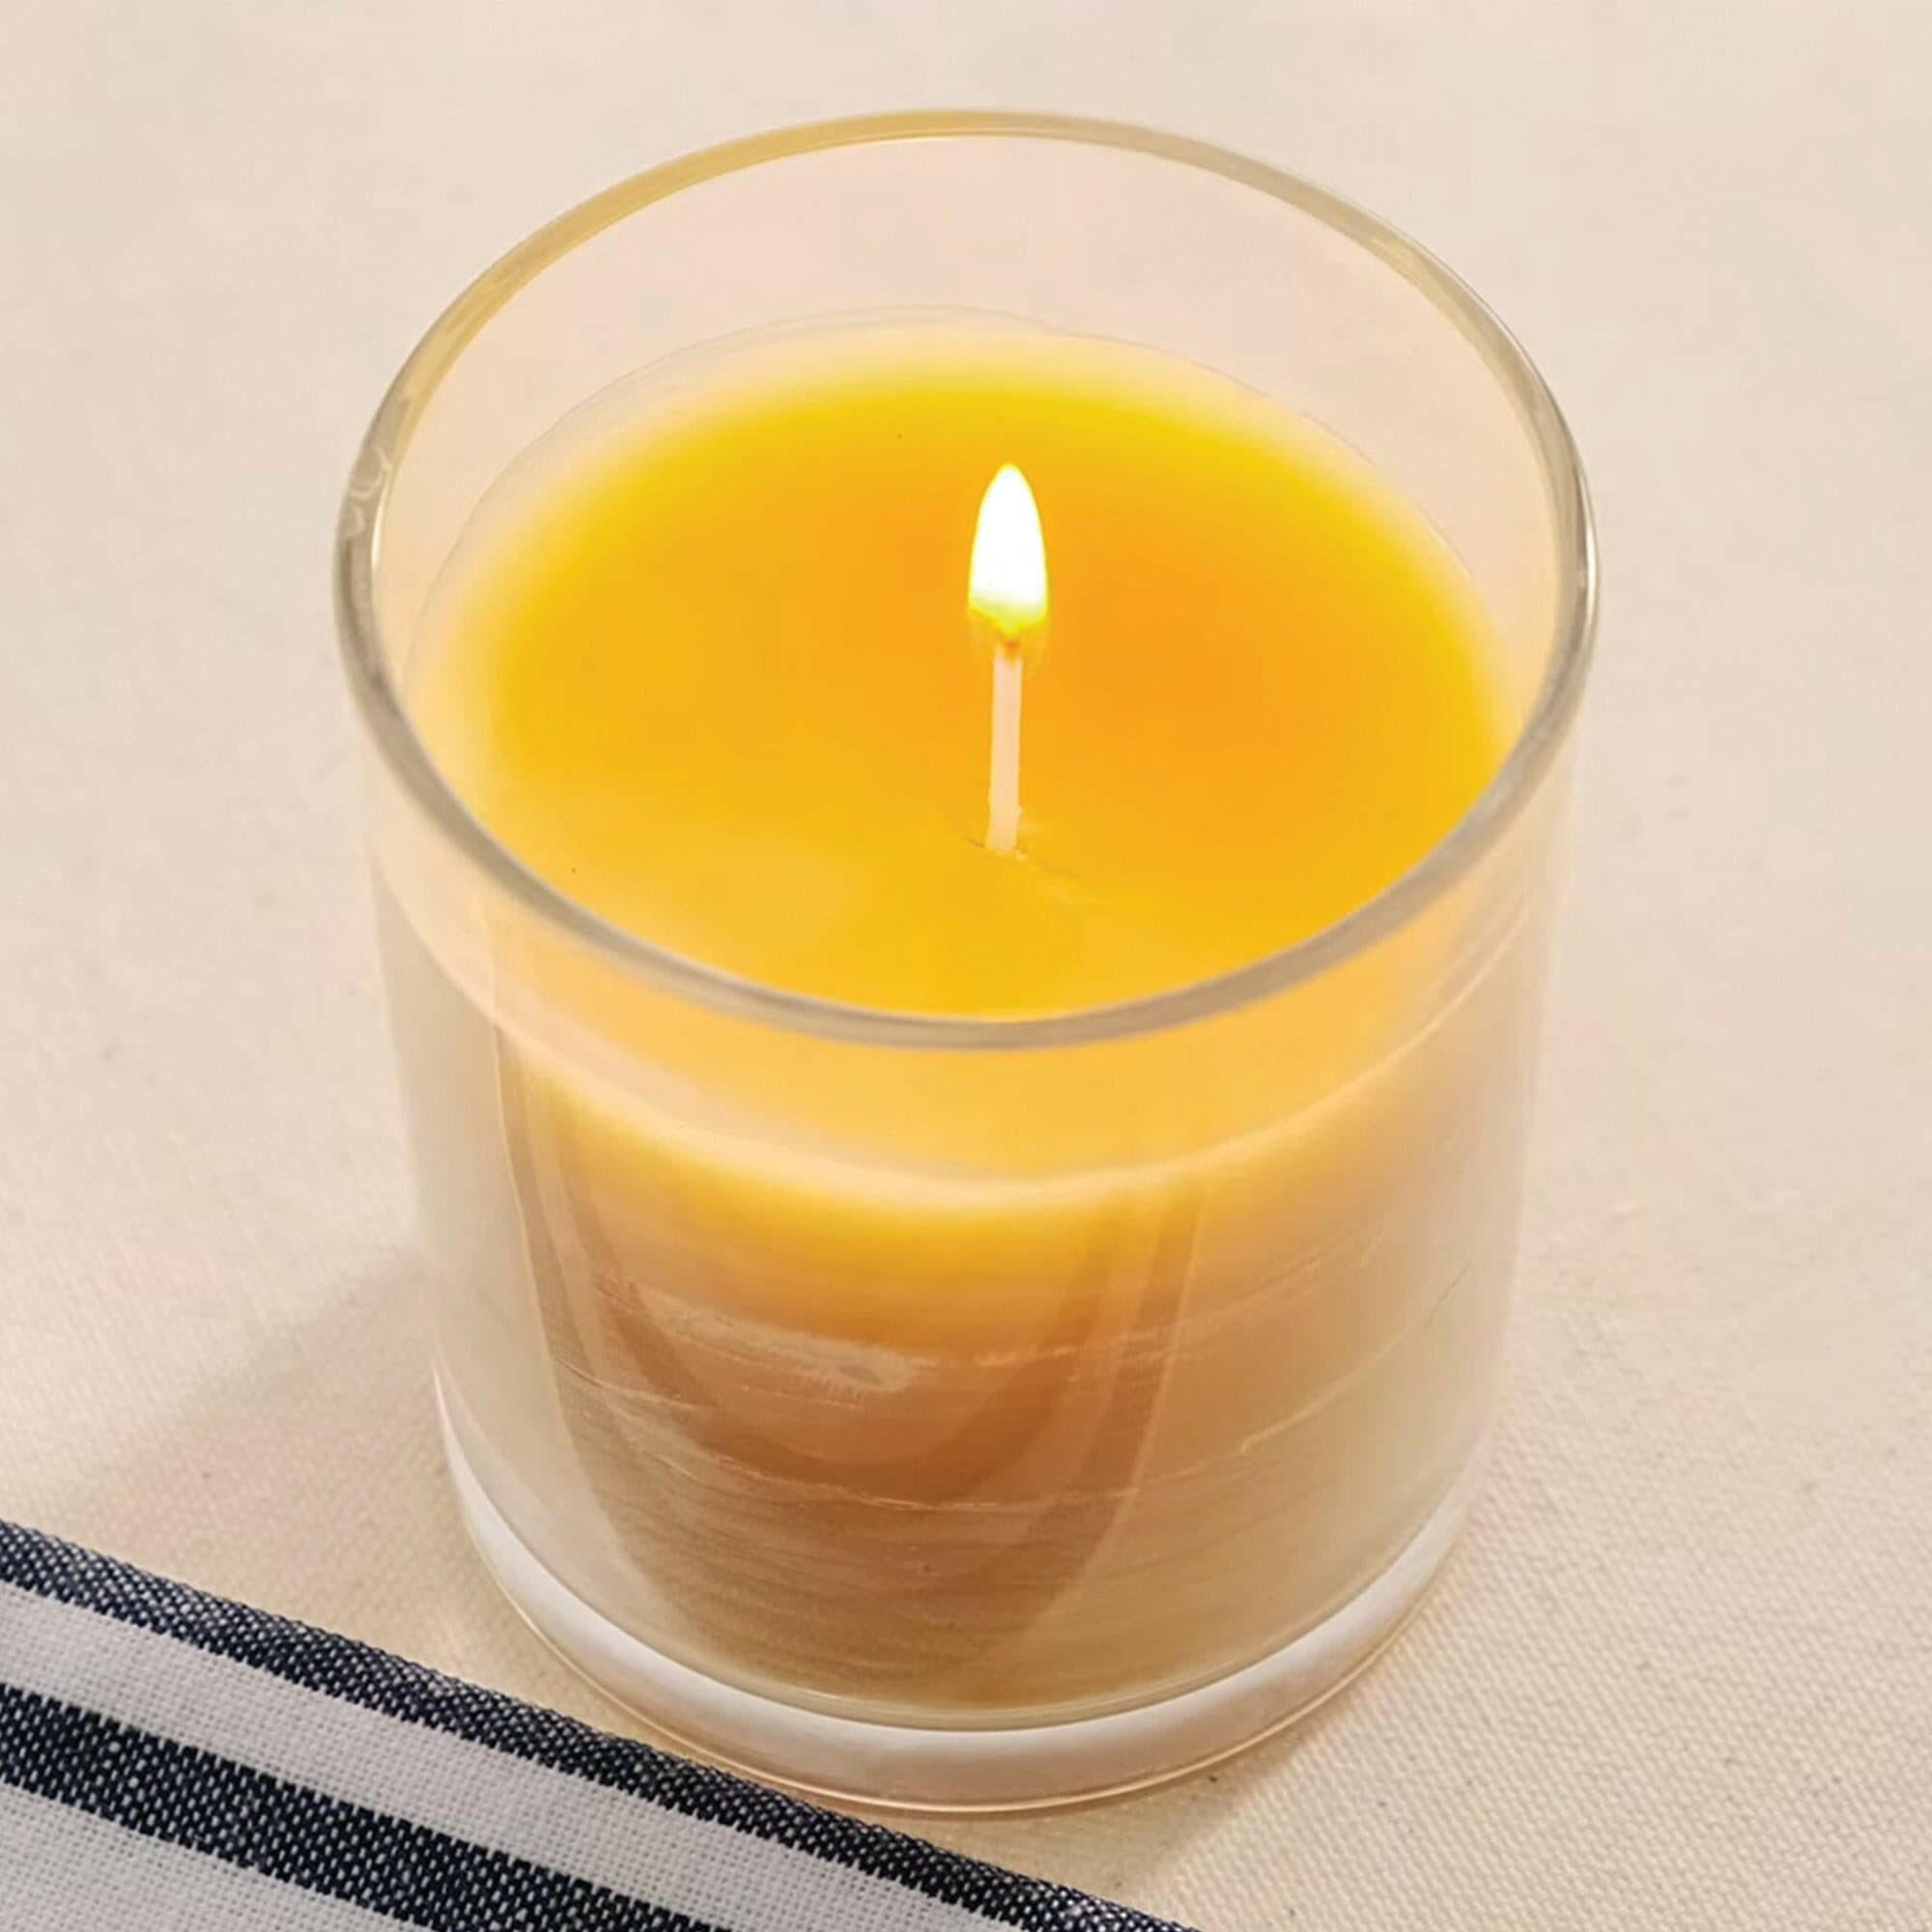 Charm Moi 【premium】100 Pcs 8 inch Candle Wick, Natural Cotton Low Smoke Candle Wick with 50 Metal Tabs for Soy Beeswax Candle Making